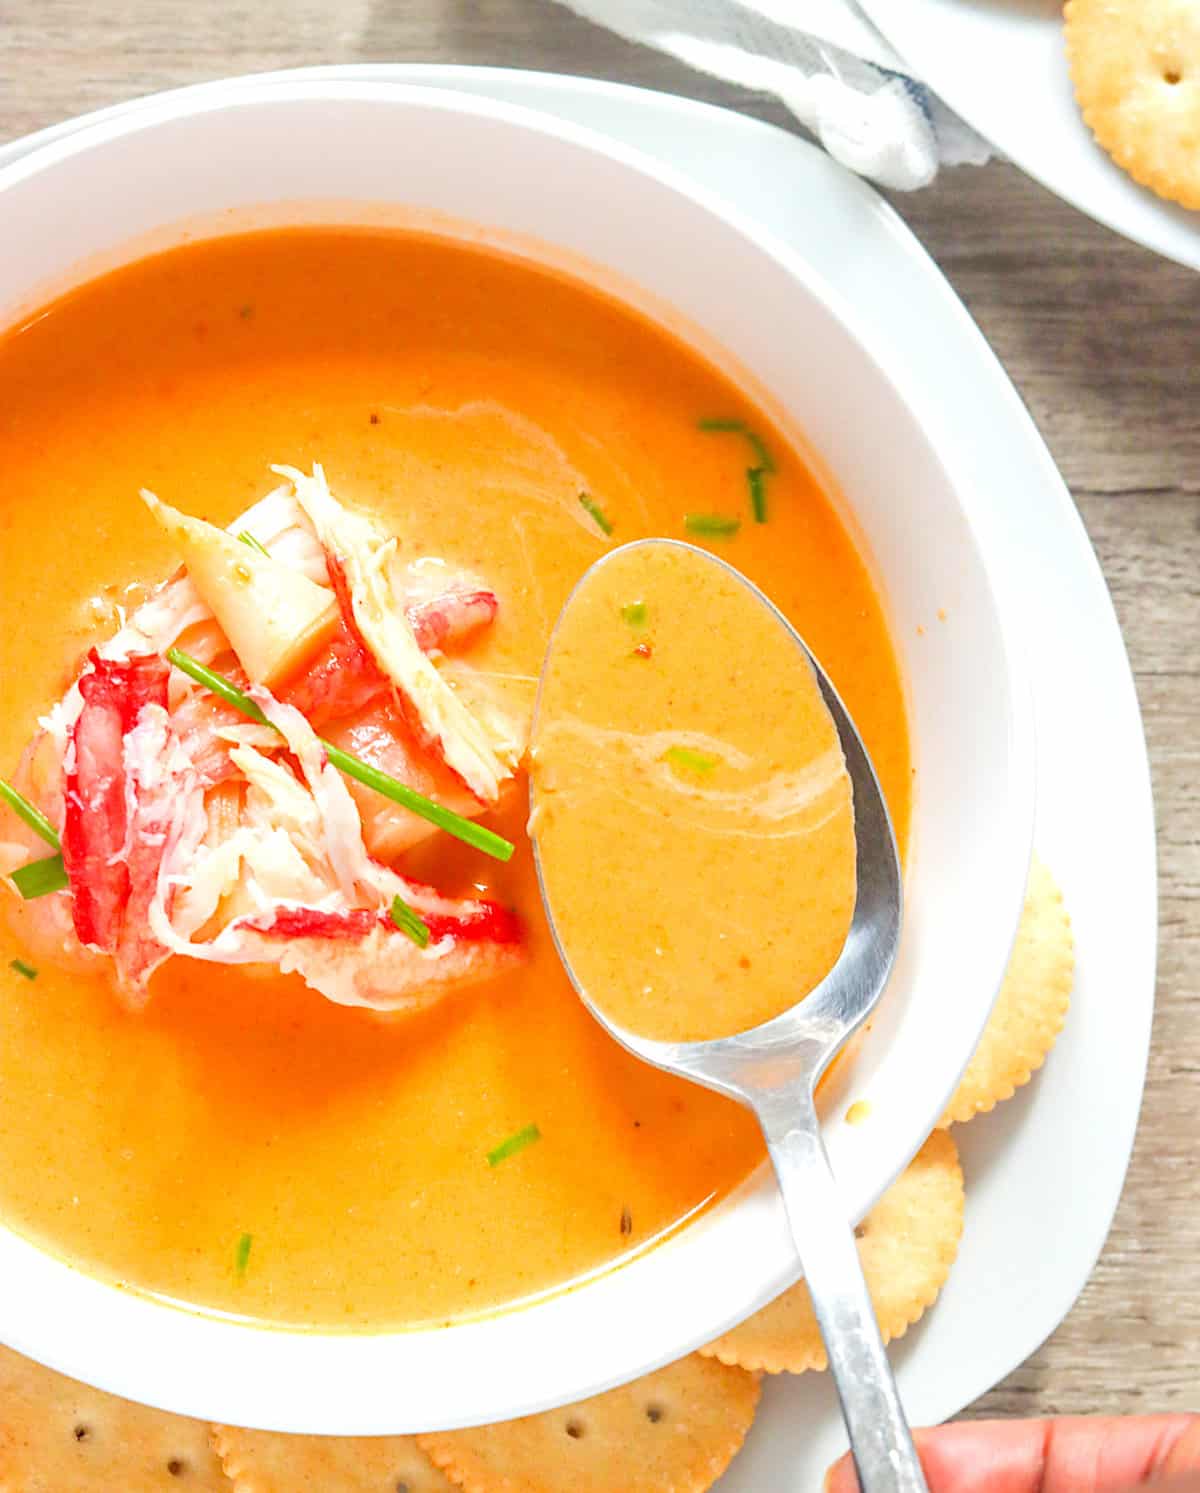 Loading up your spoon with deliciously creamy crab bisque